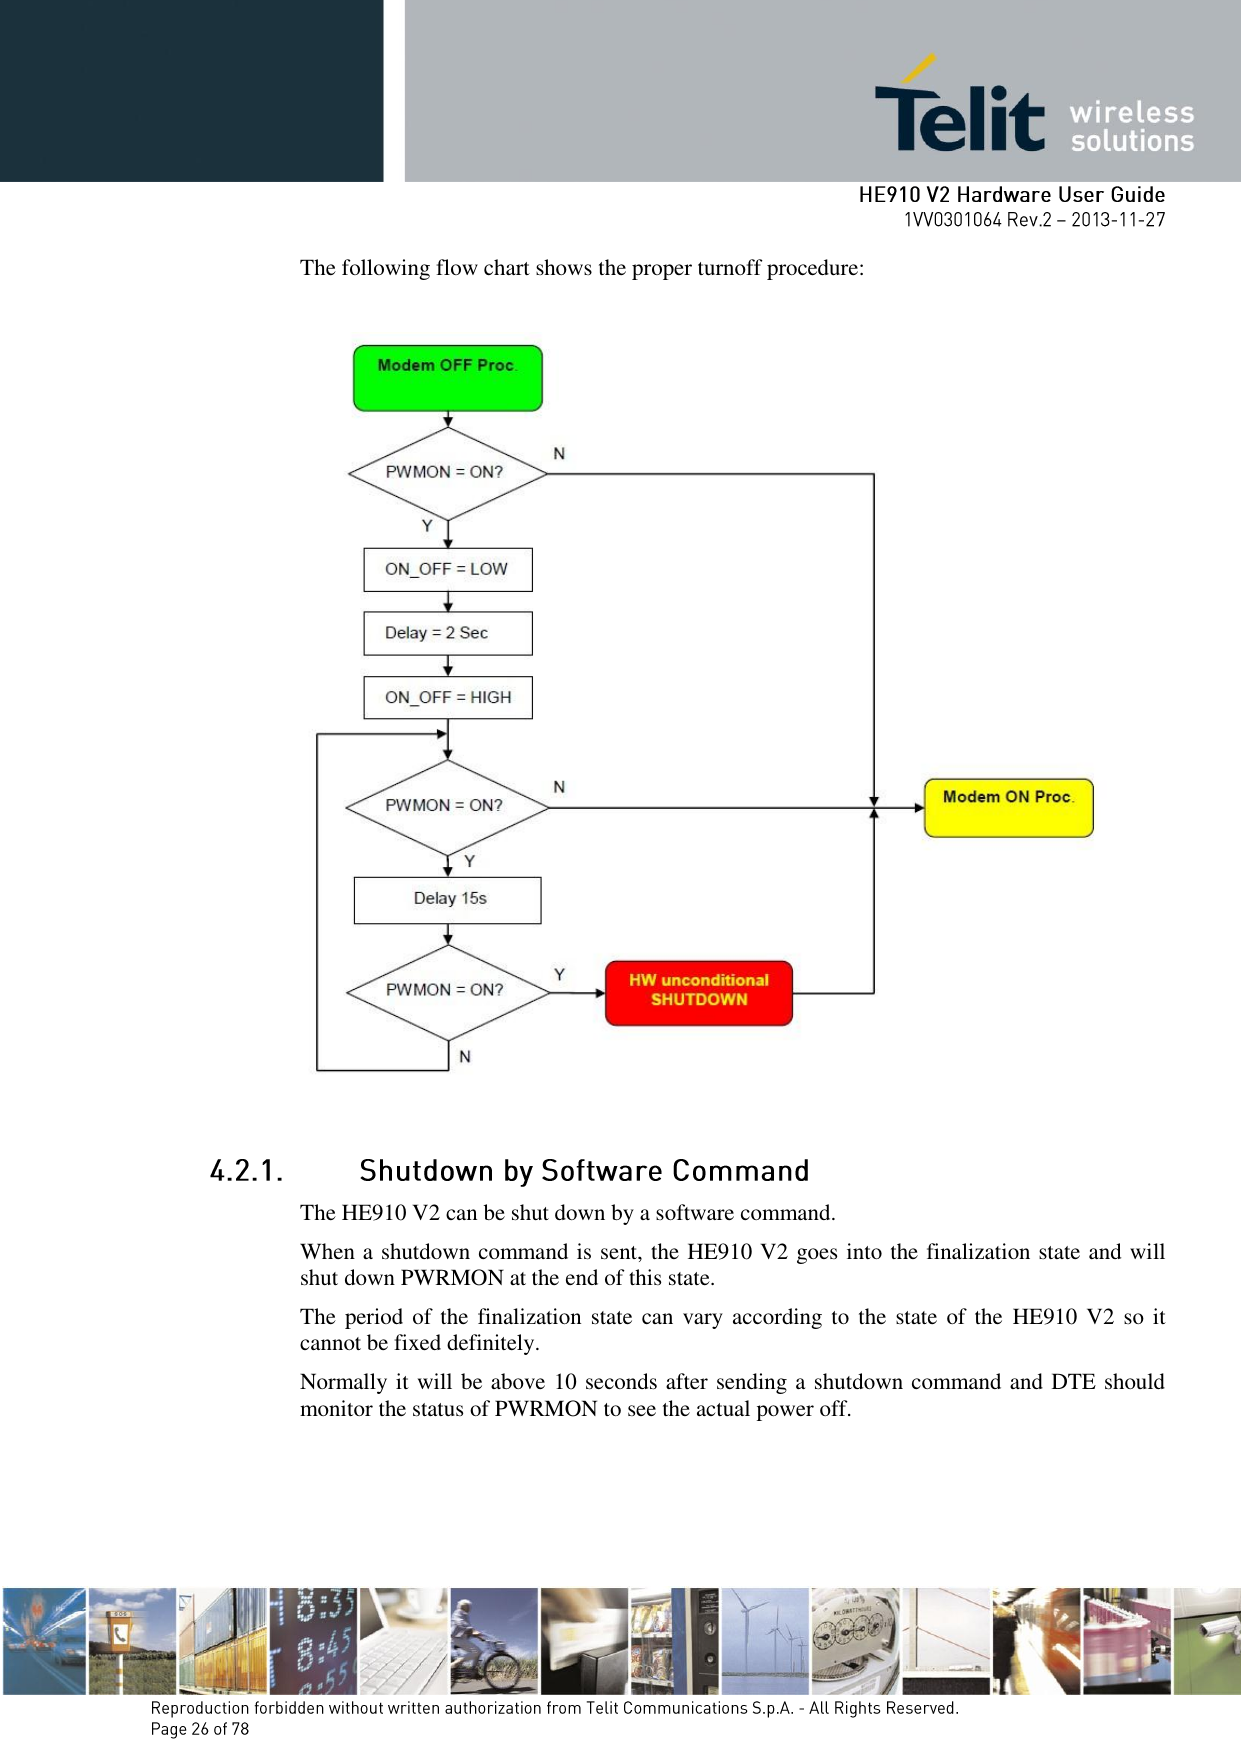       The following flow chart shows the proper turnoff procedure:    The HE910 V2 can be shut down by a software command. When a shutdown command is sent, the HE910 V2 goes into the finalization state and will shut down PWRMON at the end of this state. The period of the  finalization state can vary according to  the state  of  the  HE910 V2  so it cannot be fixed definitely. Normally it will be above 10 seconds after sending a shutdown command and DTE should monitor the status of PWRMON to see the actual power off. 